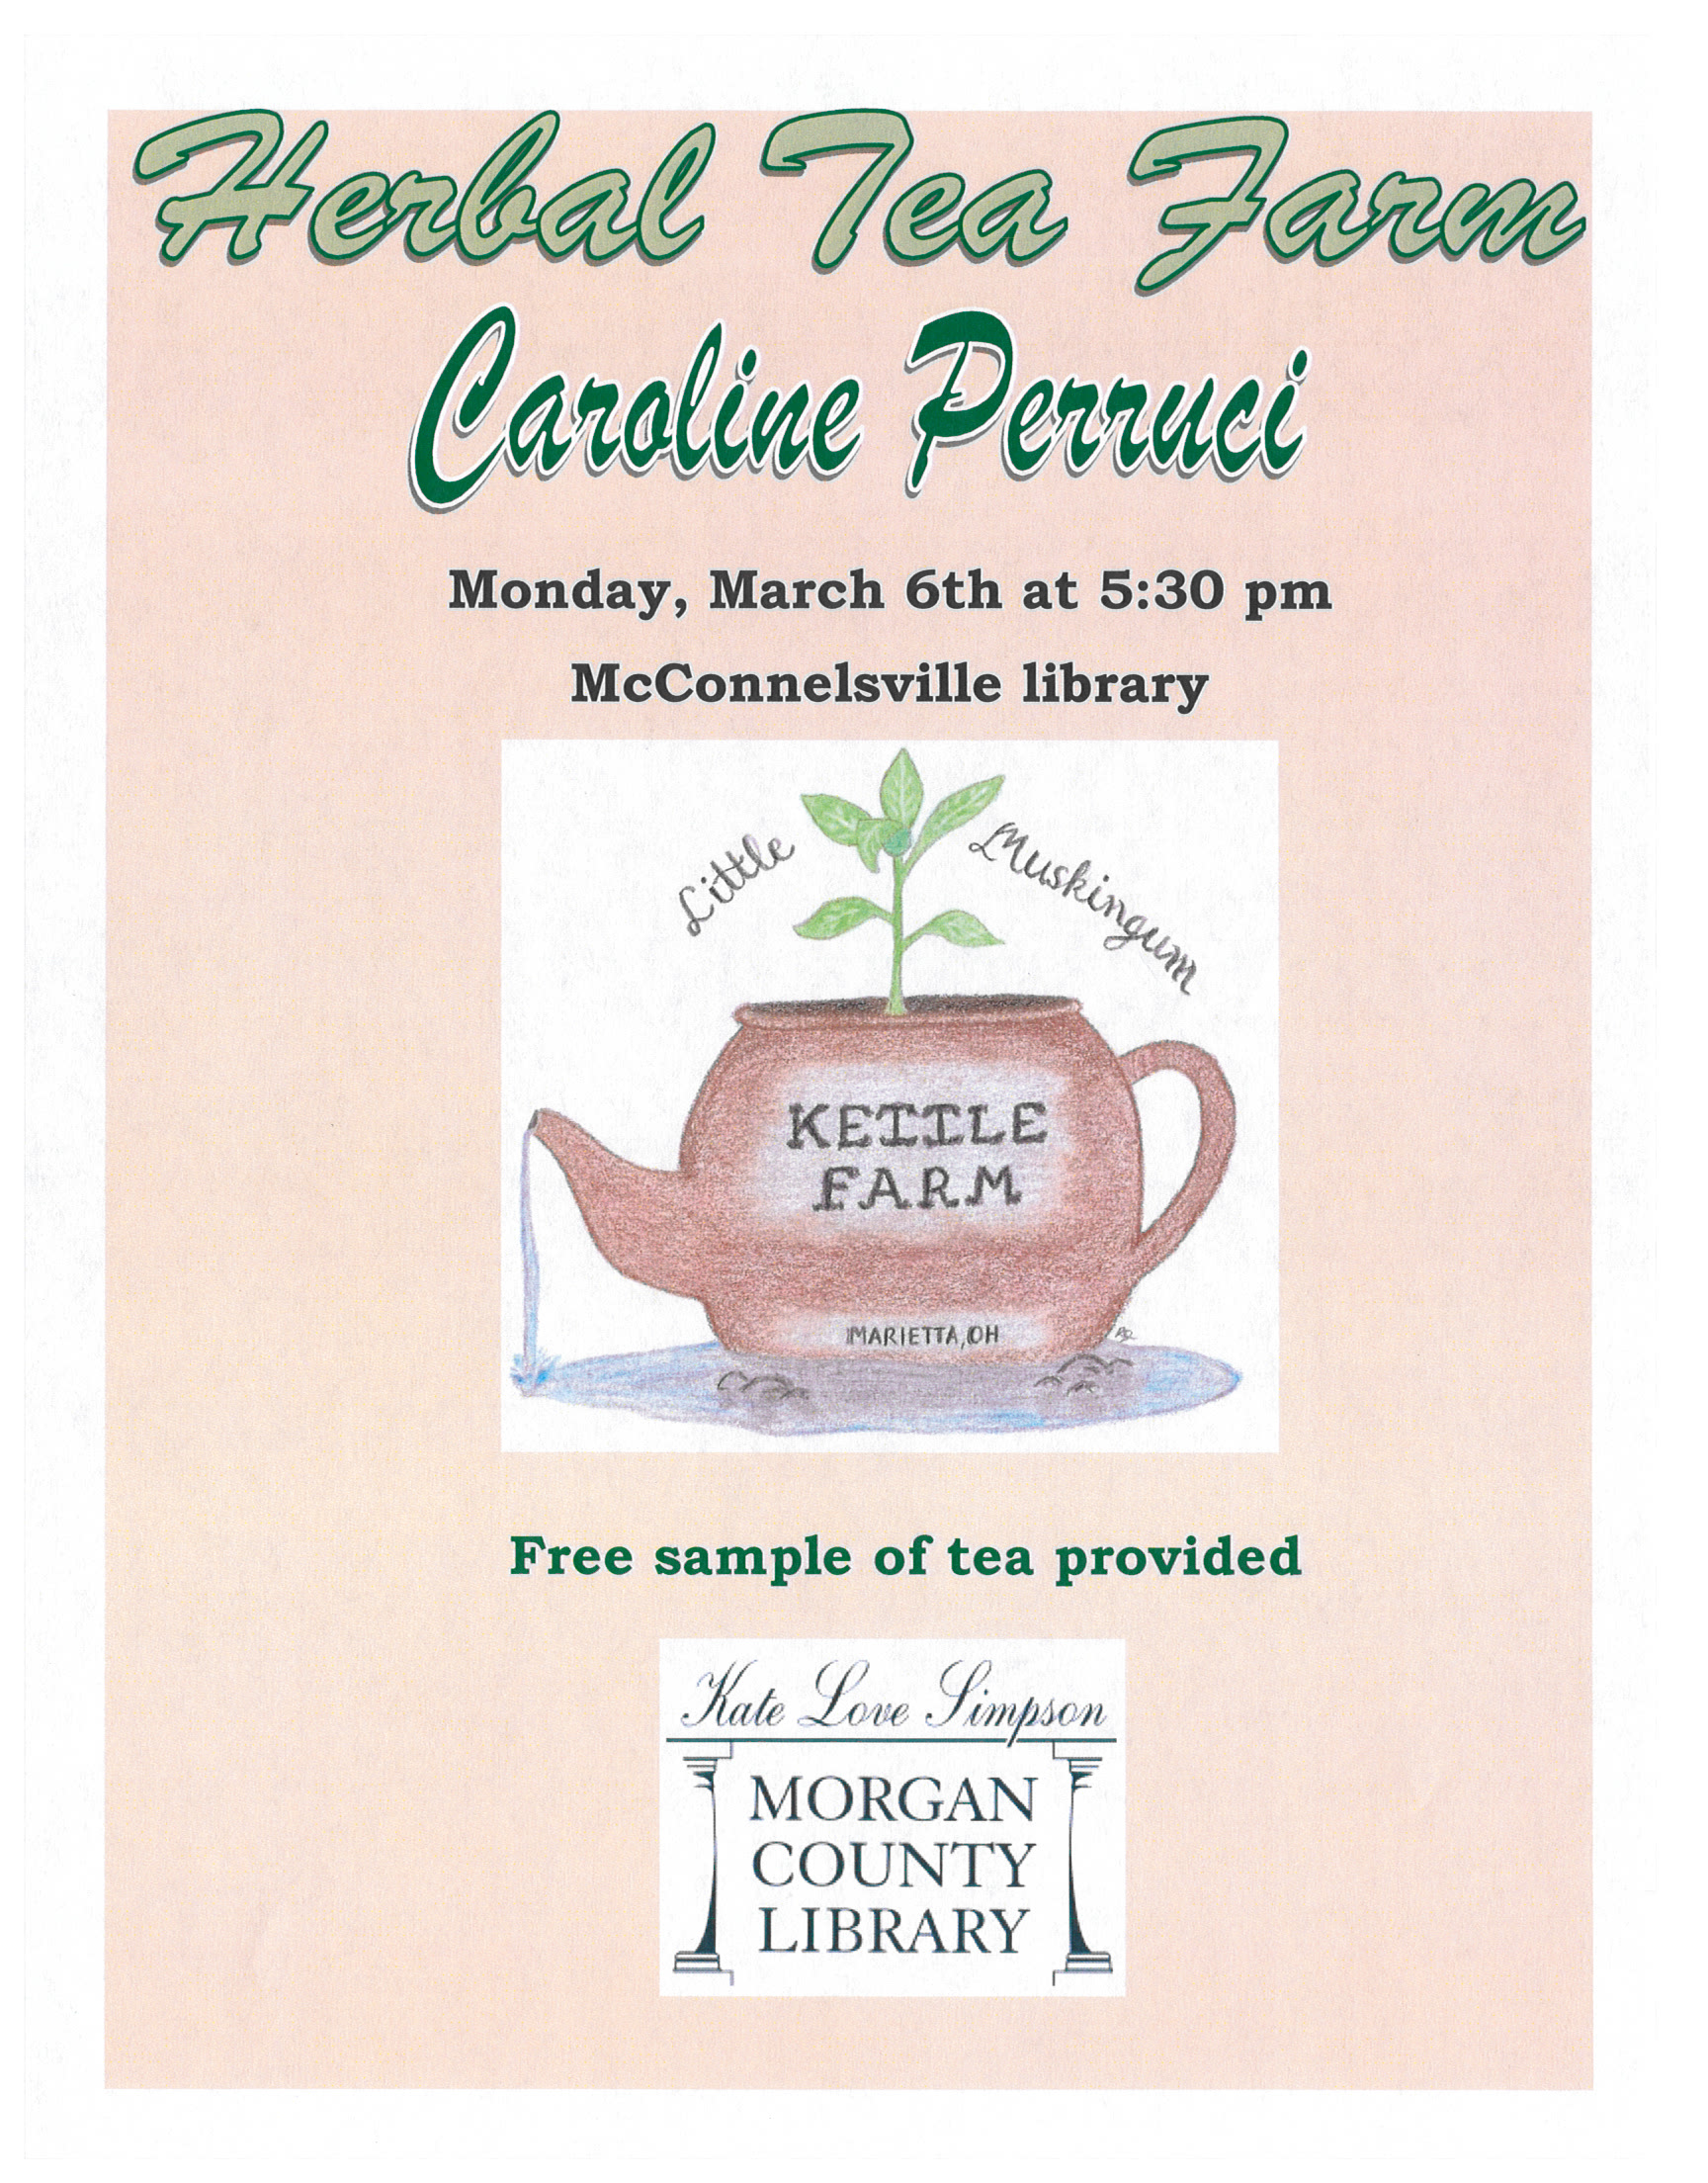 A flyer with a teapot on it for the event Herbal Tea Farm Caroline Perruci